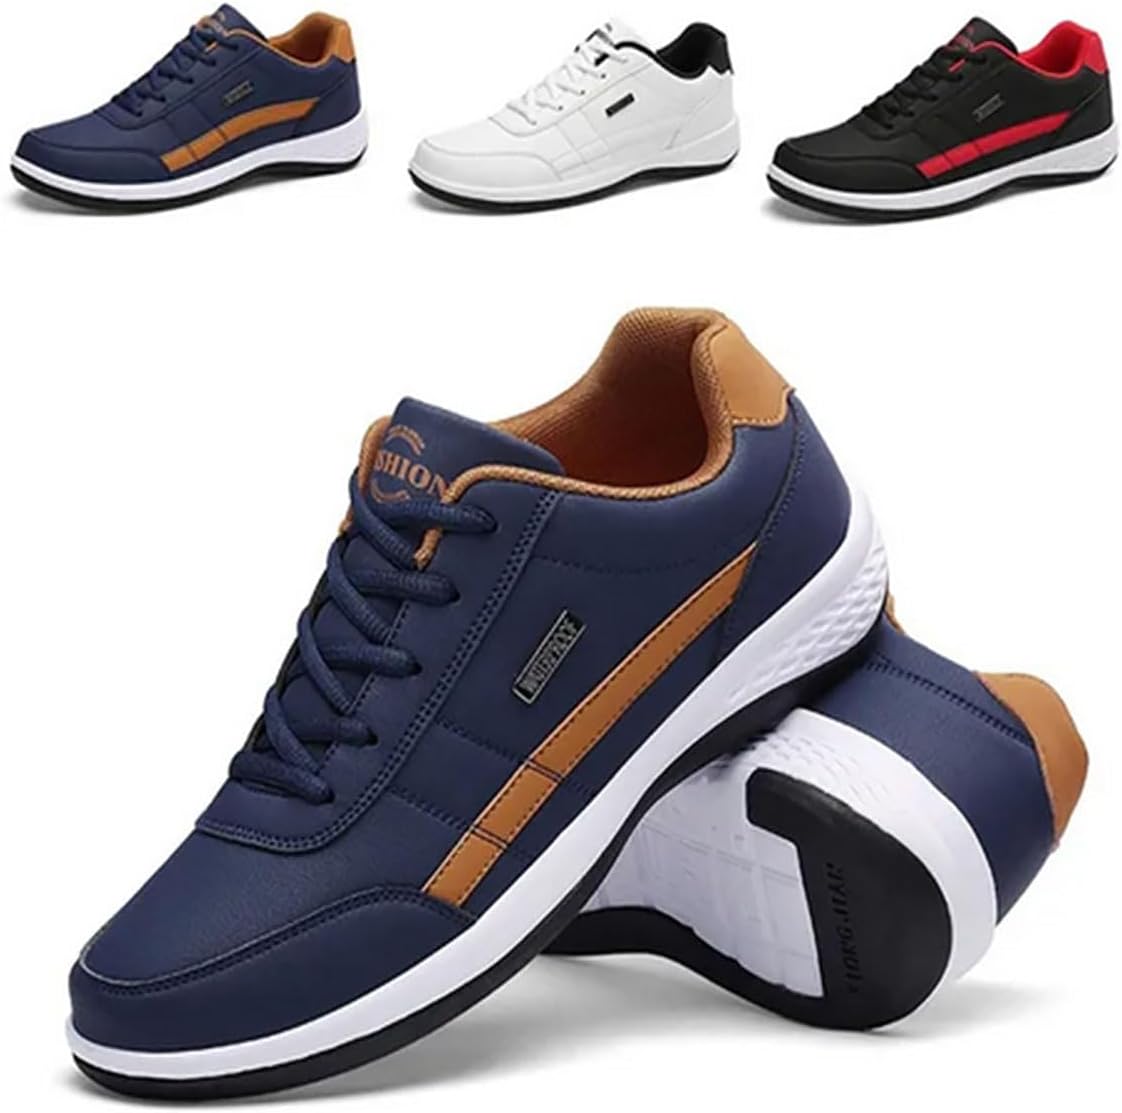 Men's Orthopedic Comfort Leather Sneaker Mens Casual Shoes, Leather ...